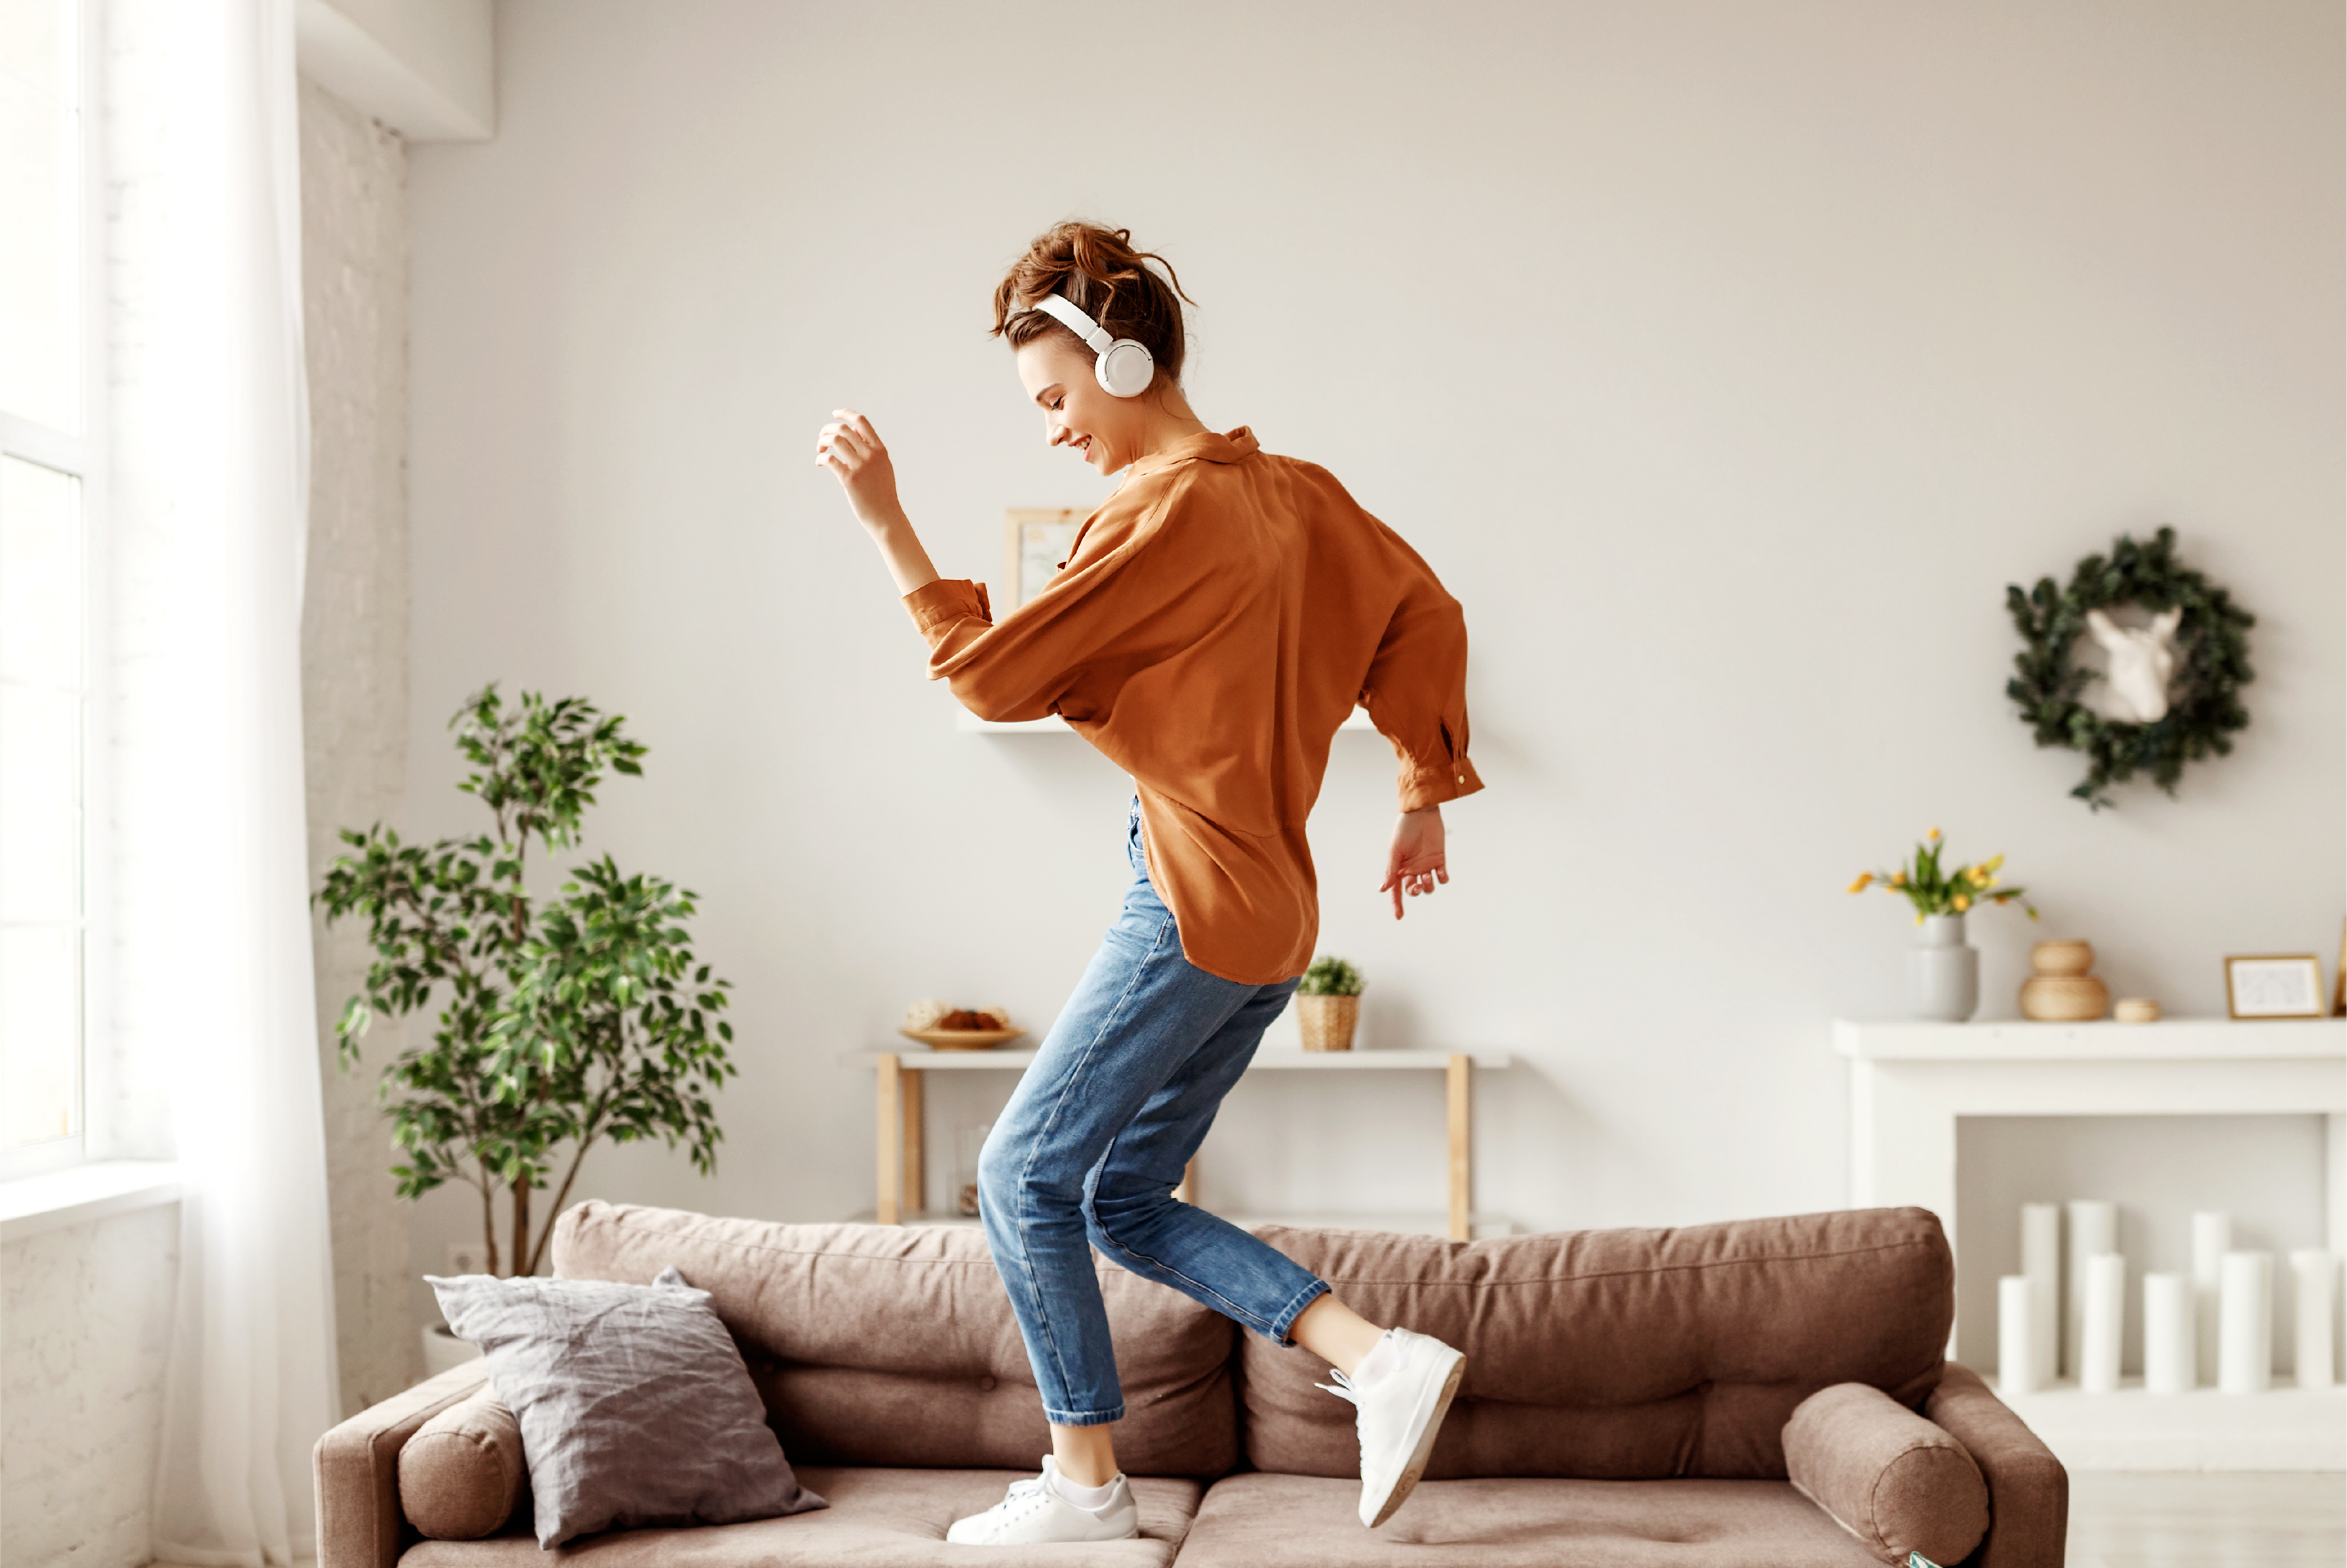 woman listening to headphones, jumping on a couch